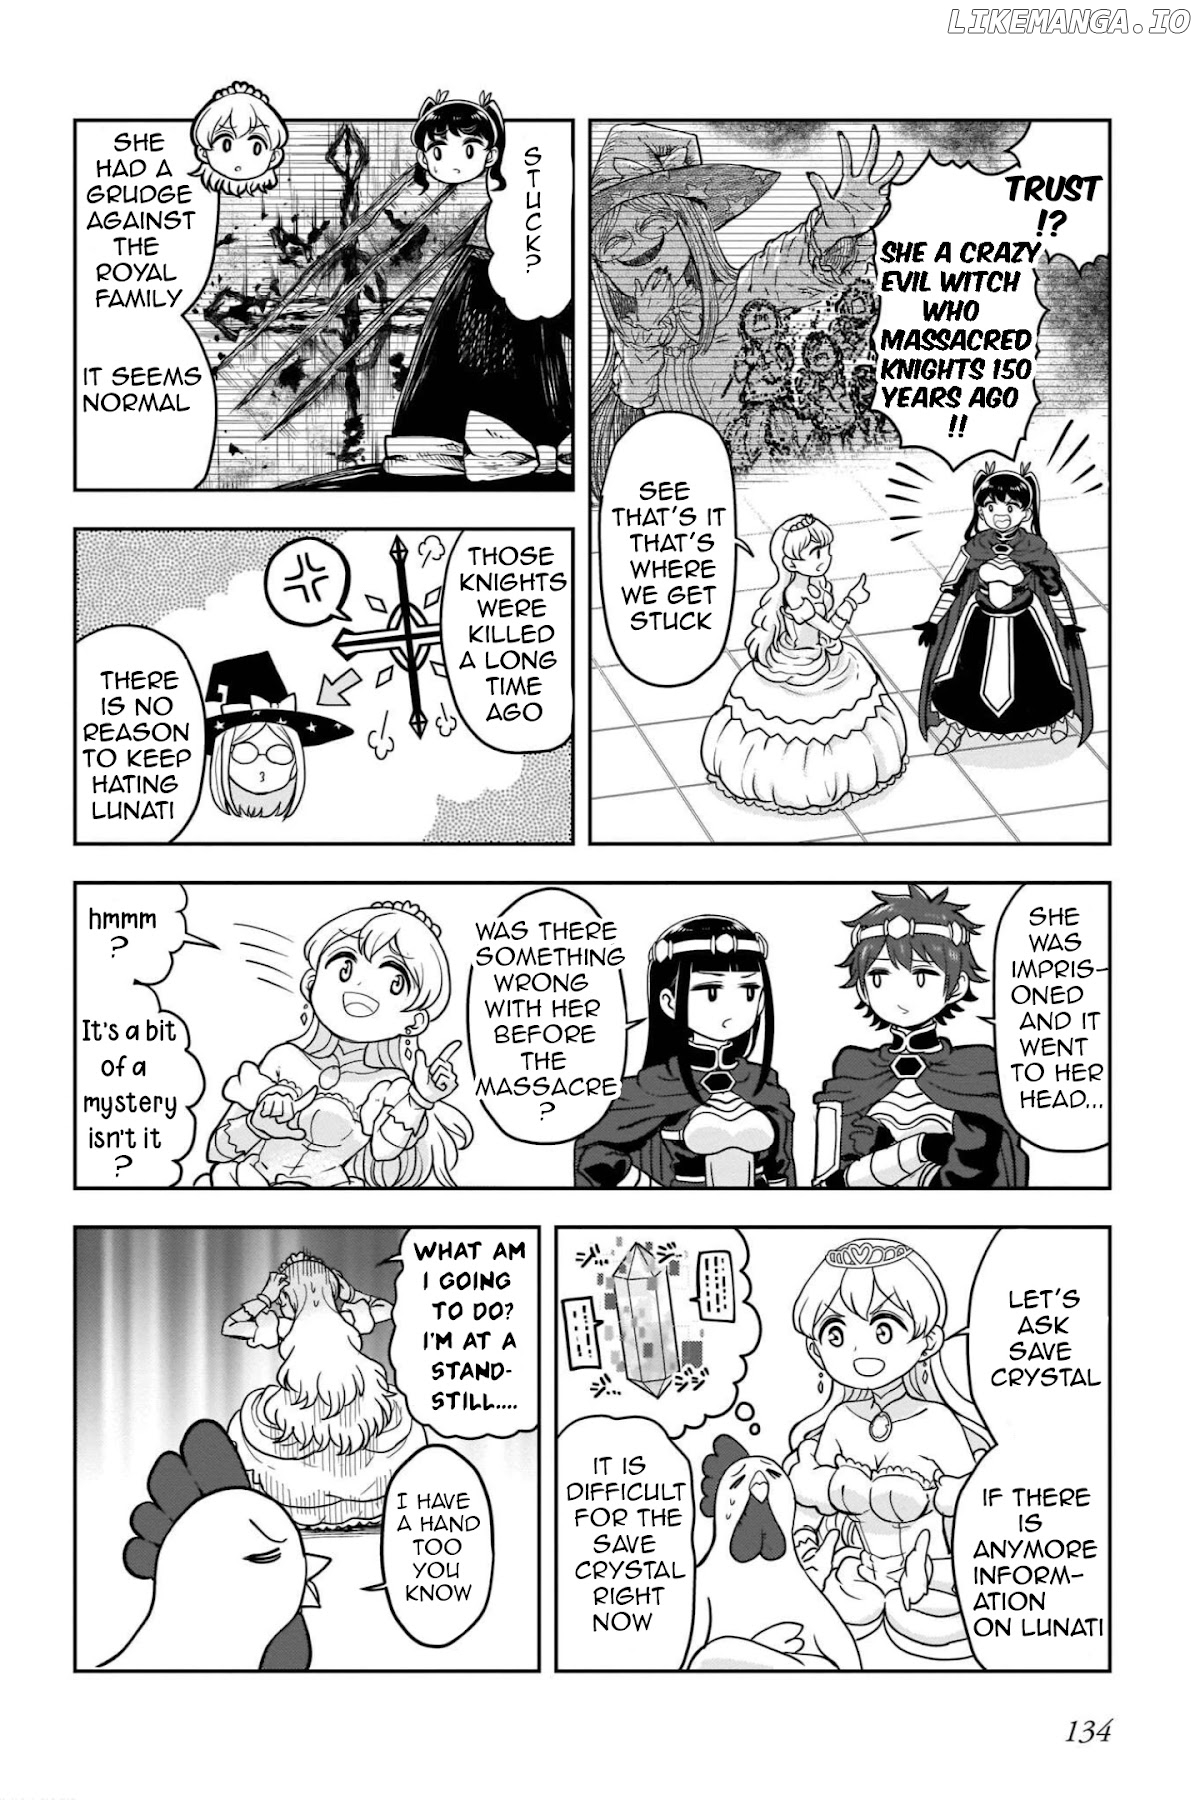 The Female Knight Says, "My Princess, You Must Die." chapter 13.2 - page 3